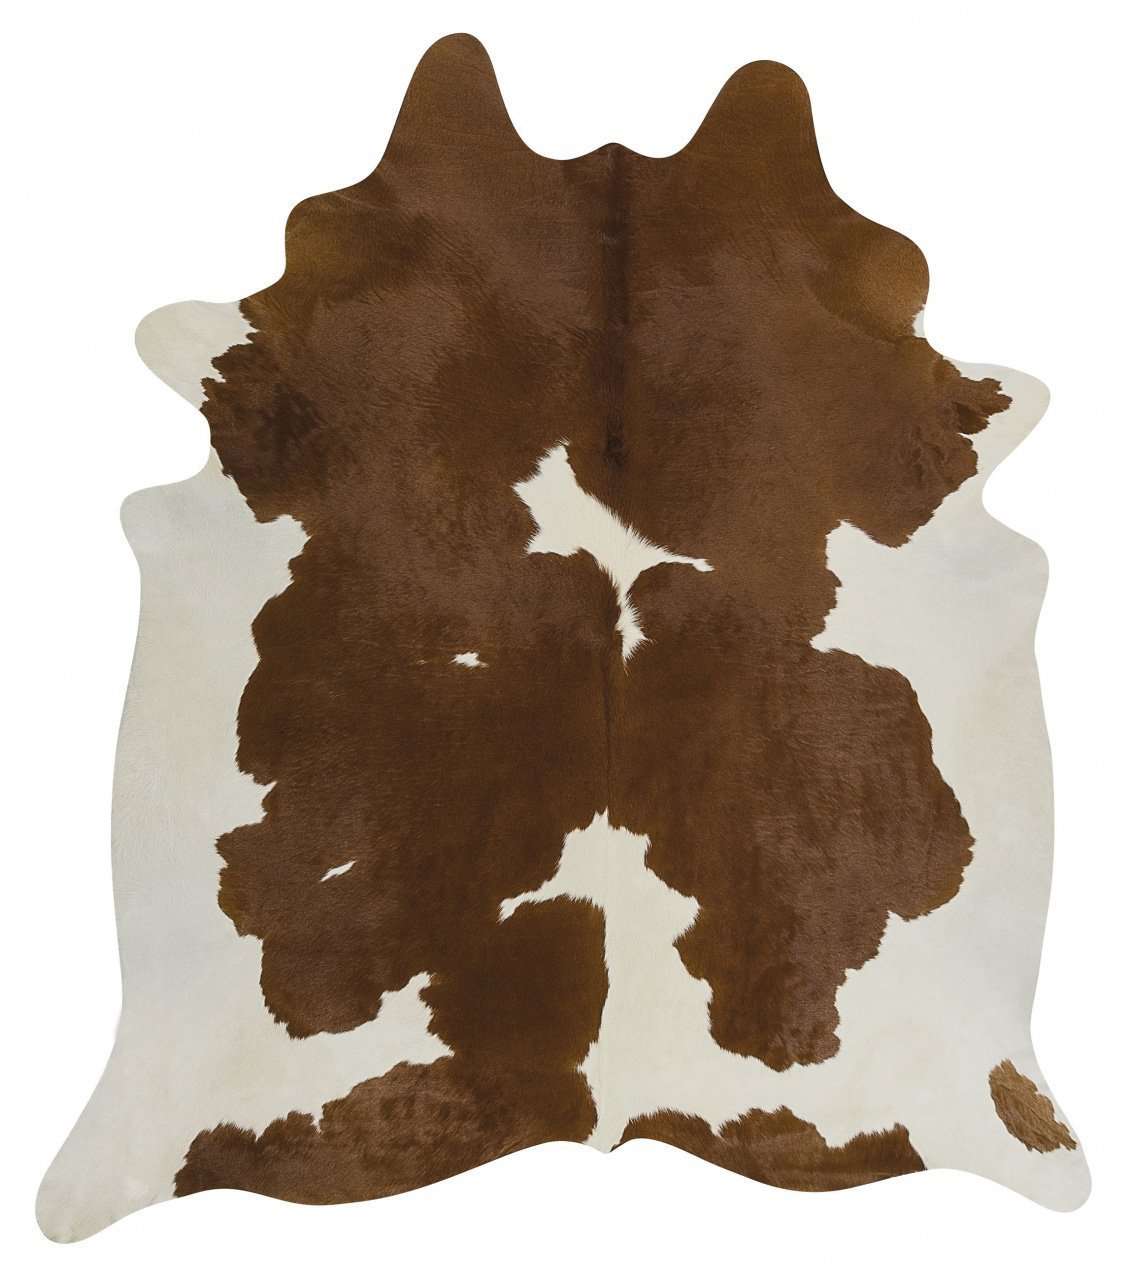 Rug Culture RUGS 170x120cm Cow Hide - Brown & White